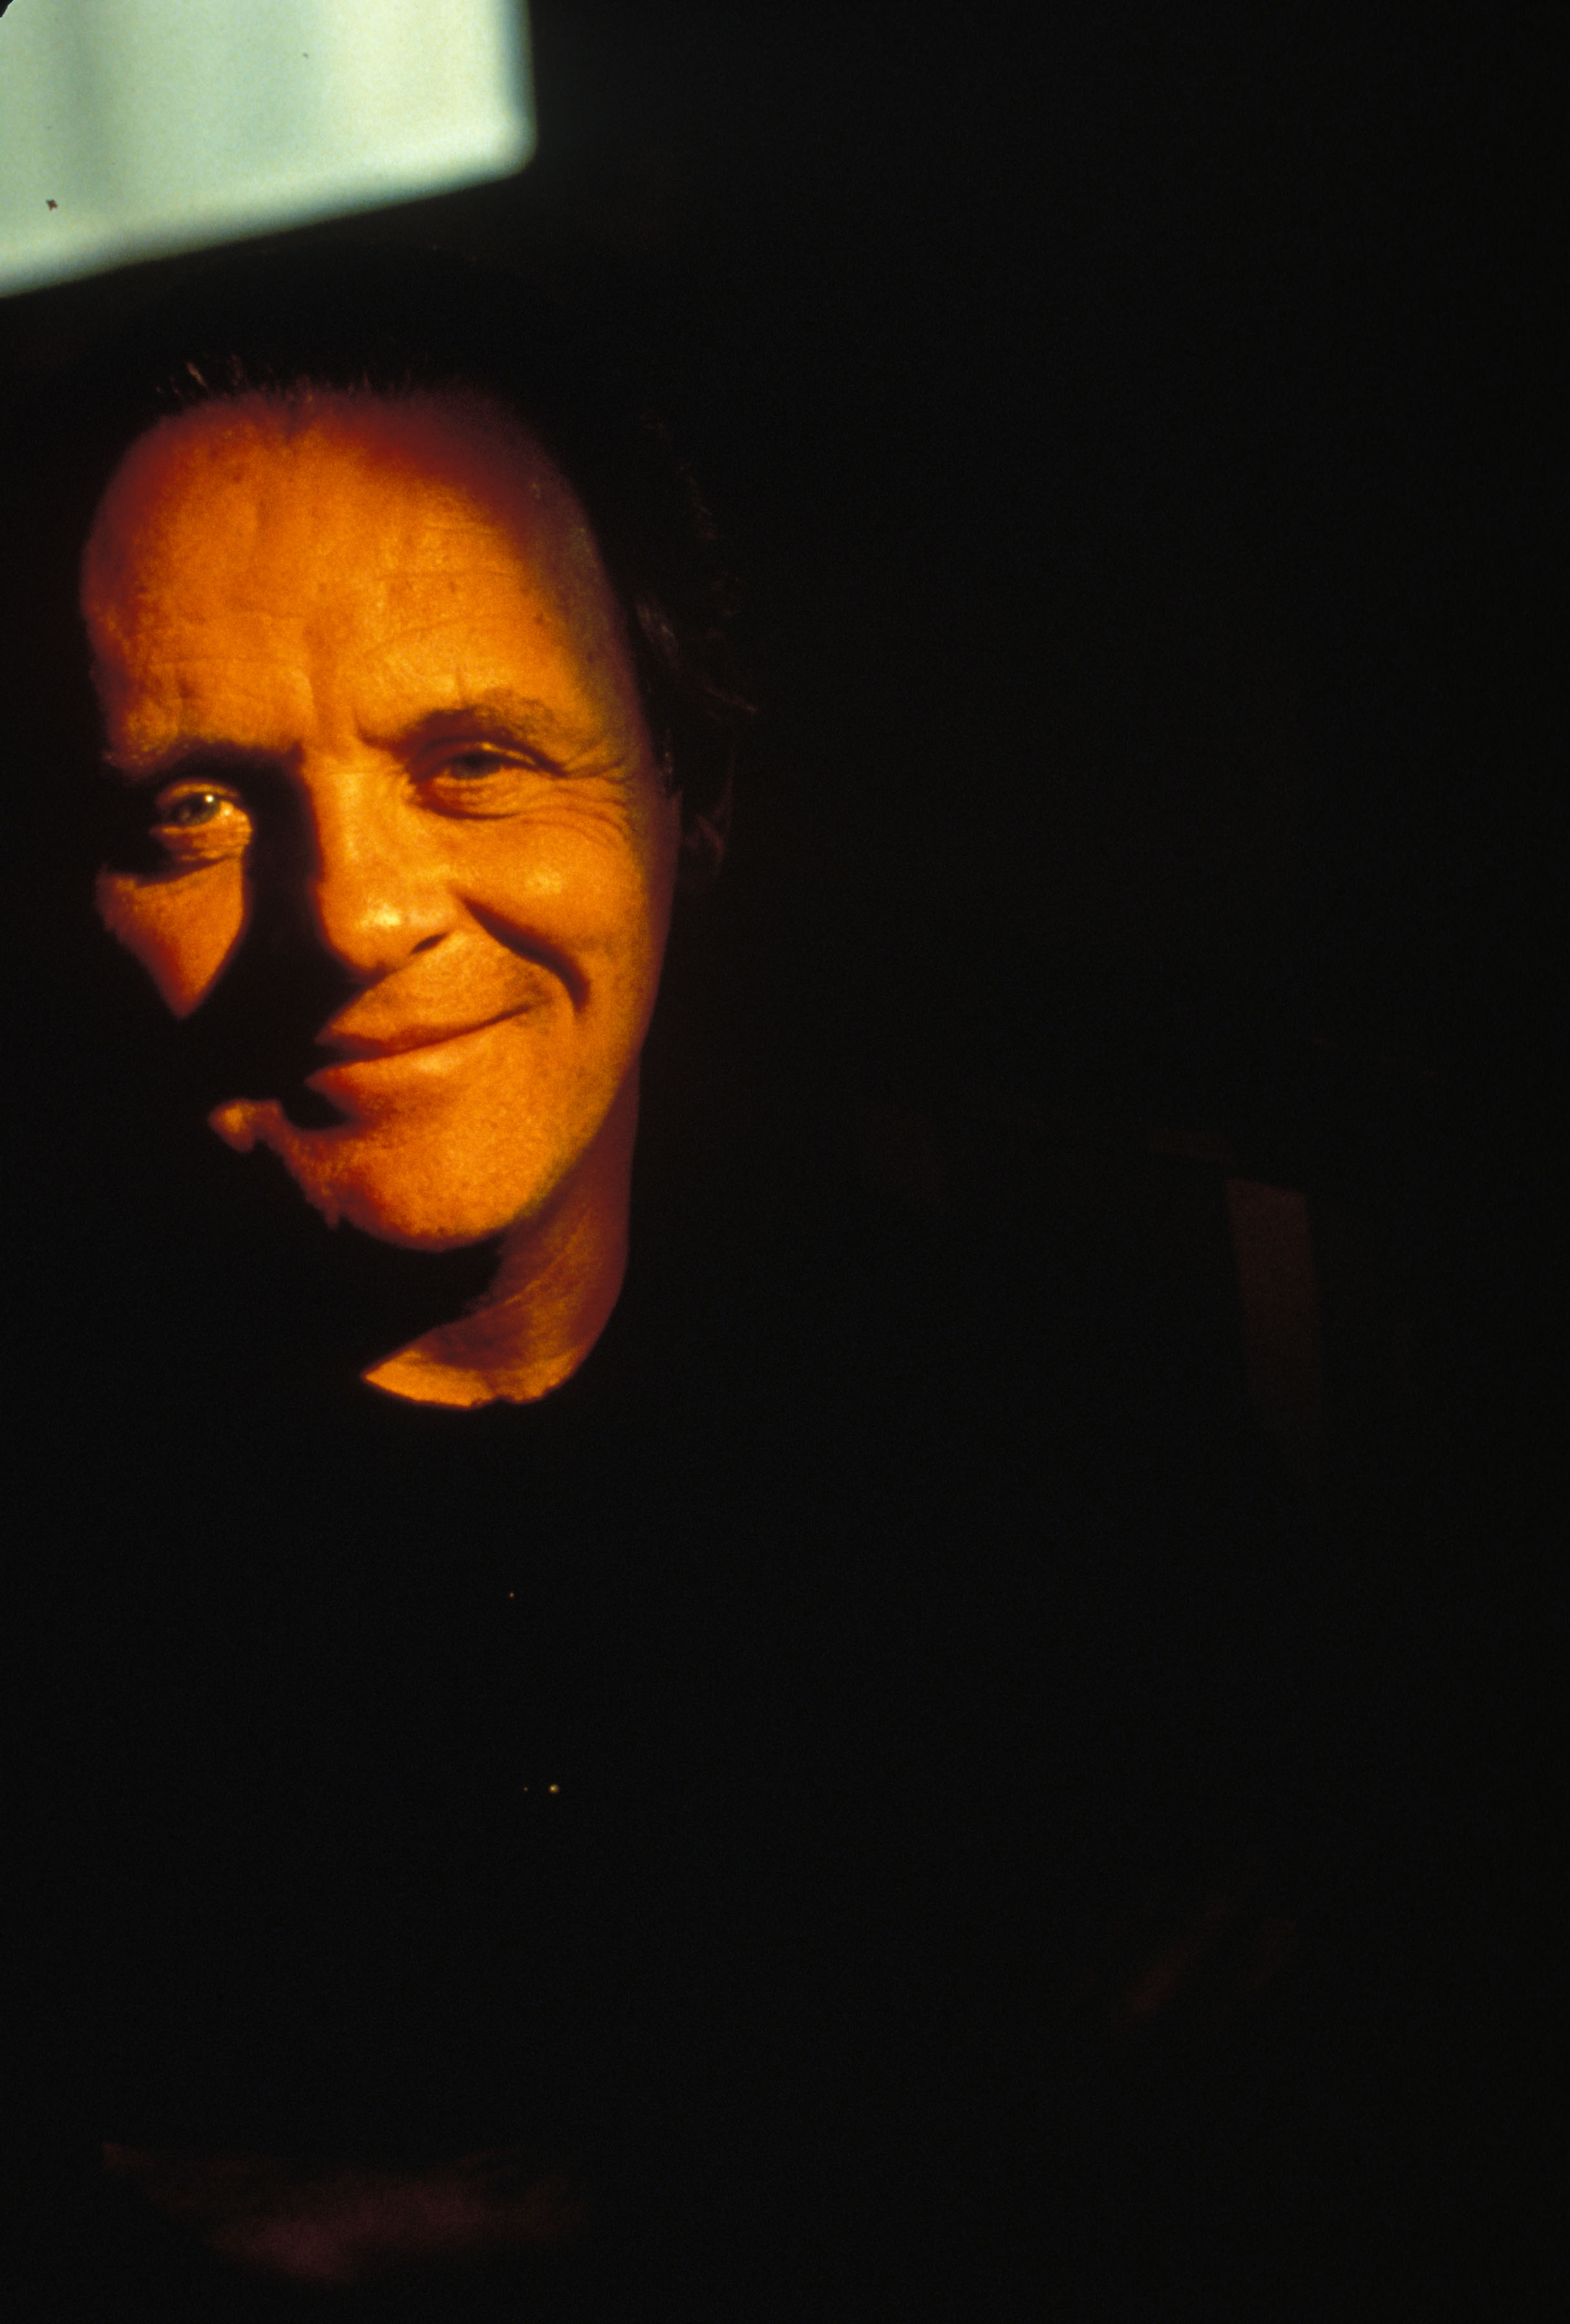 Anthony Hopkins photo 38 of 63 pics, wallpaper - photo #313641 - ThePlace2